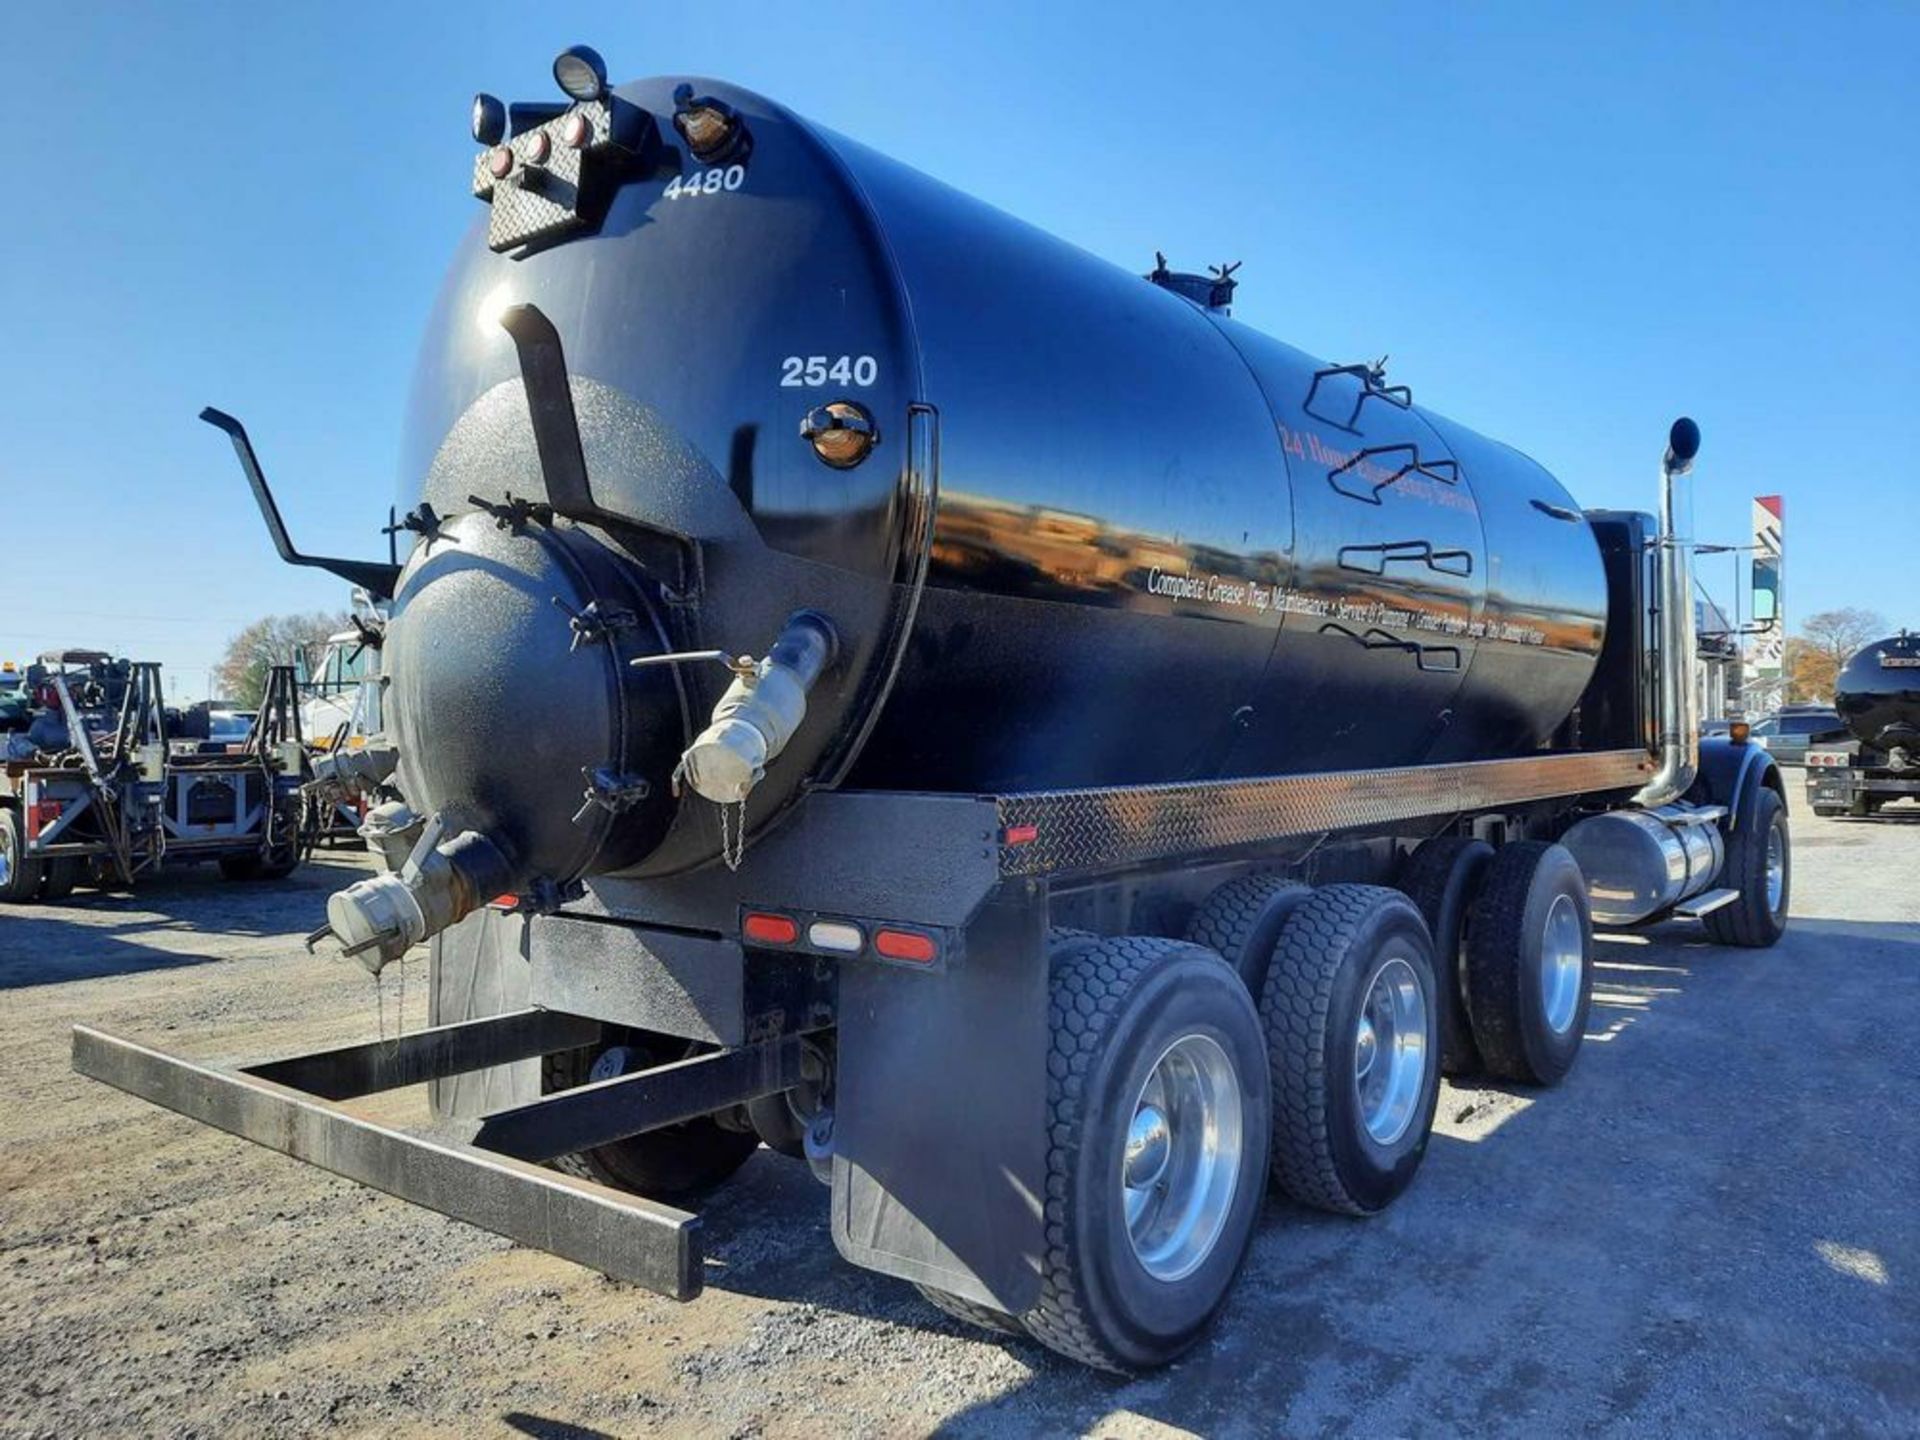 2003 KENWORTH T 800 SEPTIC TANK TRUCK - Image 3 of 25